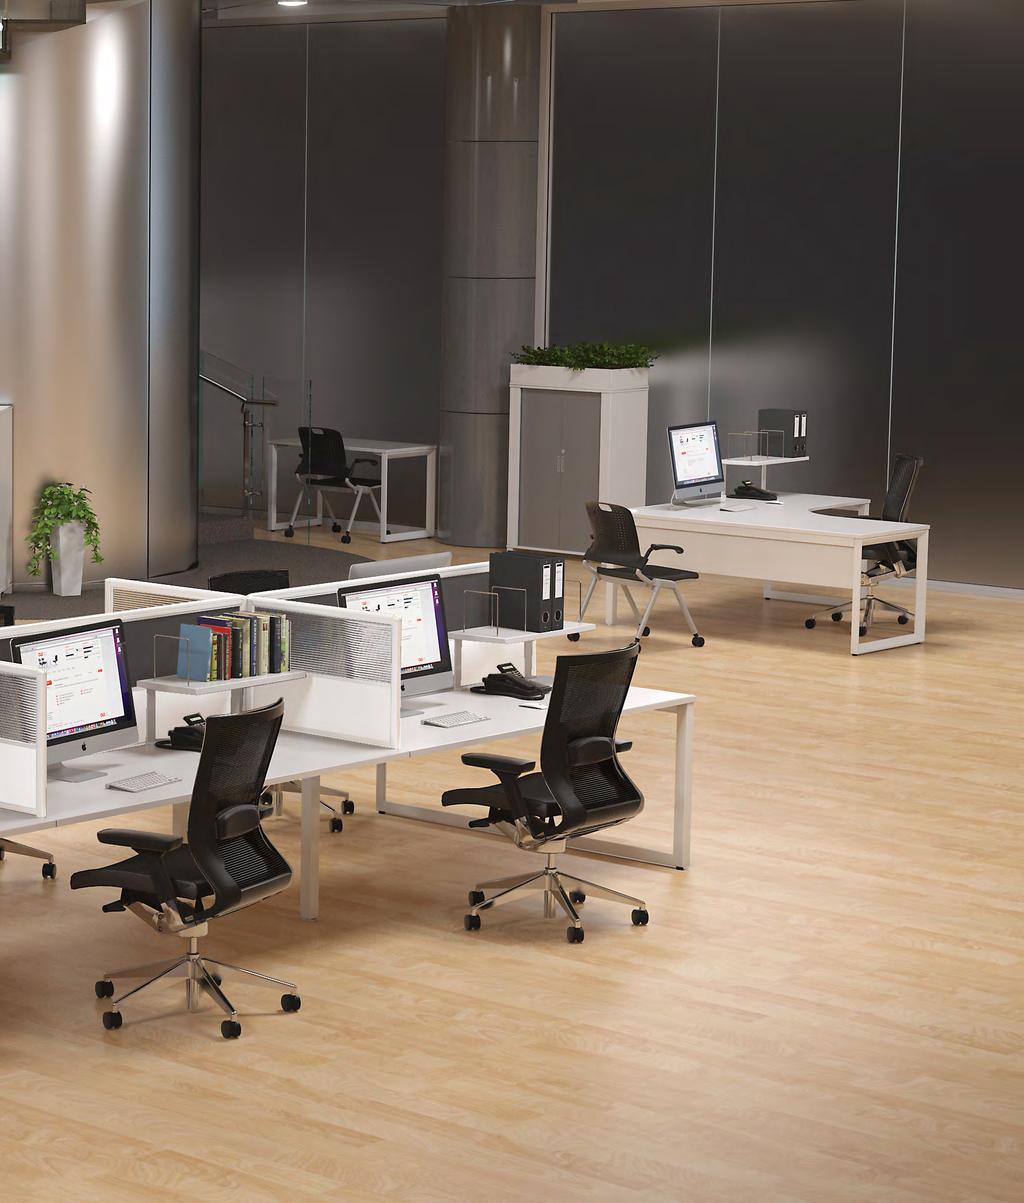 Anvil 6 Pod Desks with Split Screens, Anvil 90 Workstation and Anvil Single Desk combined with Axis